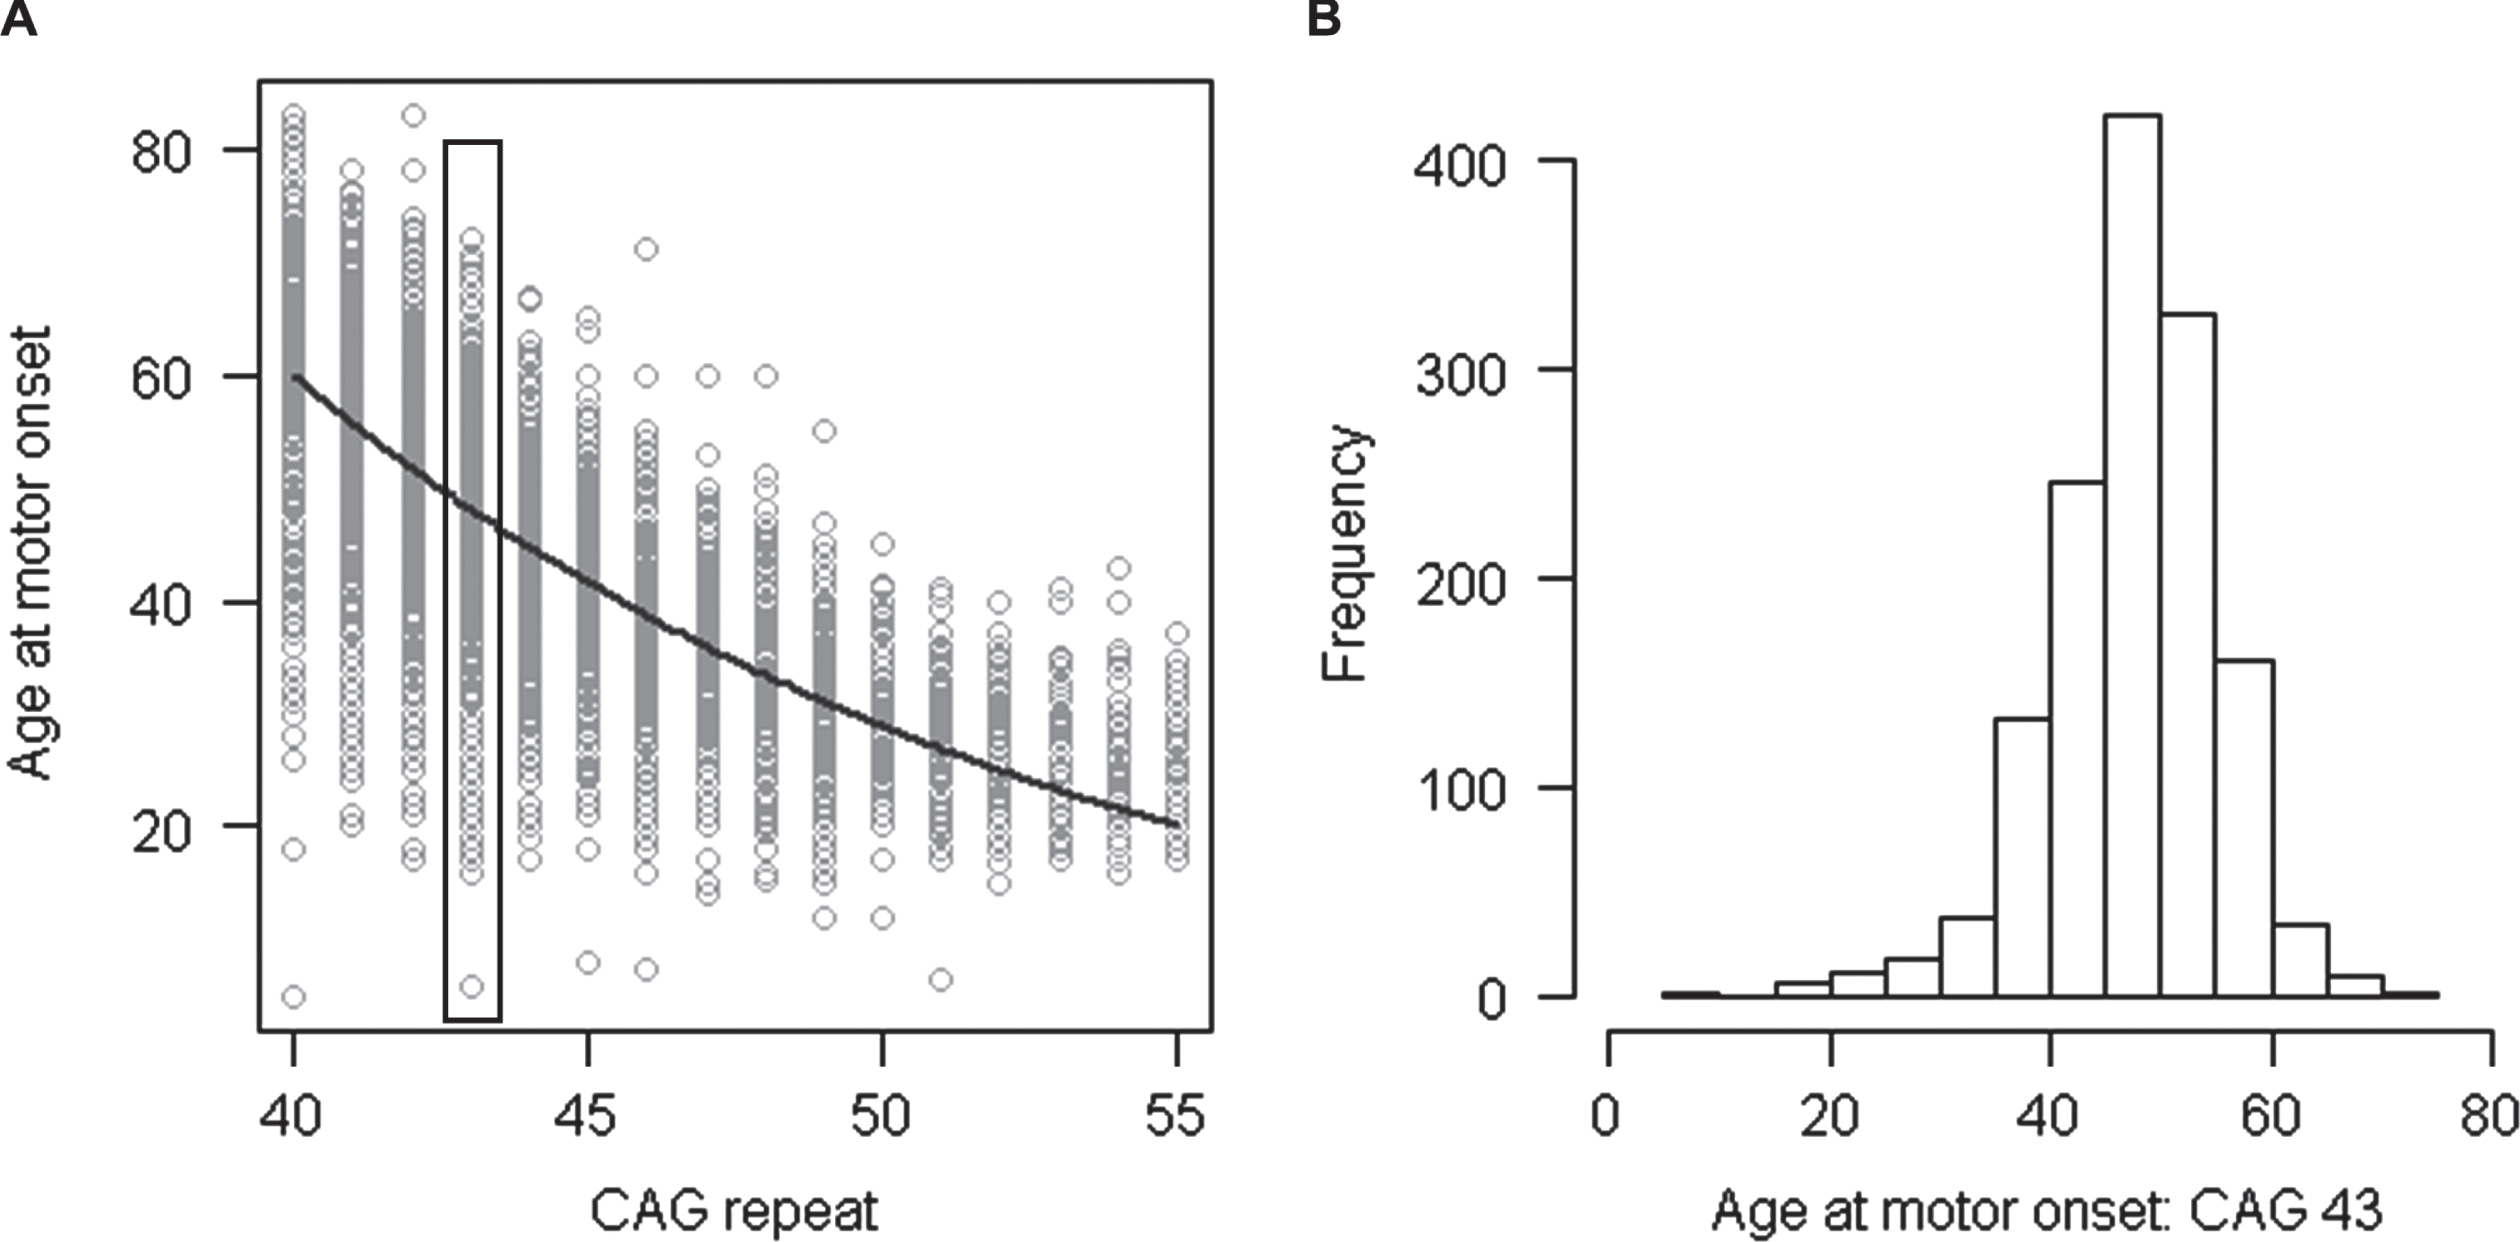 Relationship of age at motor onset with CAG repeat. A. Age at onset of motor signs estimated by raters (Y-axis) is compared to the size of uninterrupted CAG repeat (X-axis) for subjects with inherited CAG sizes of 40–55 repeats. Each circle represents a HD subject participating our recent onset modifier GWA study [37]. B. Age at onset of motor signs for the subset of HD subjects who inherited 43 CAGs (∼15.5% of the total data set) is plotted to show the wide variability in clinical manifestation due to factors other than CAG repeat length.